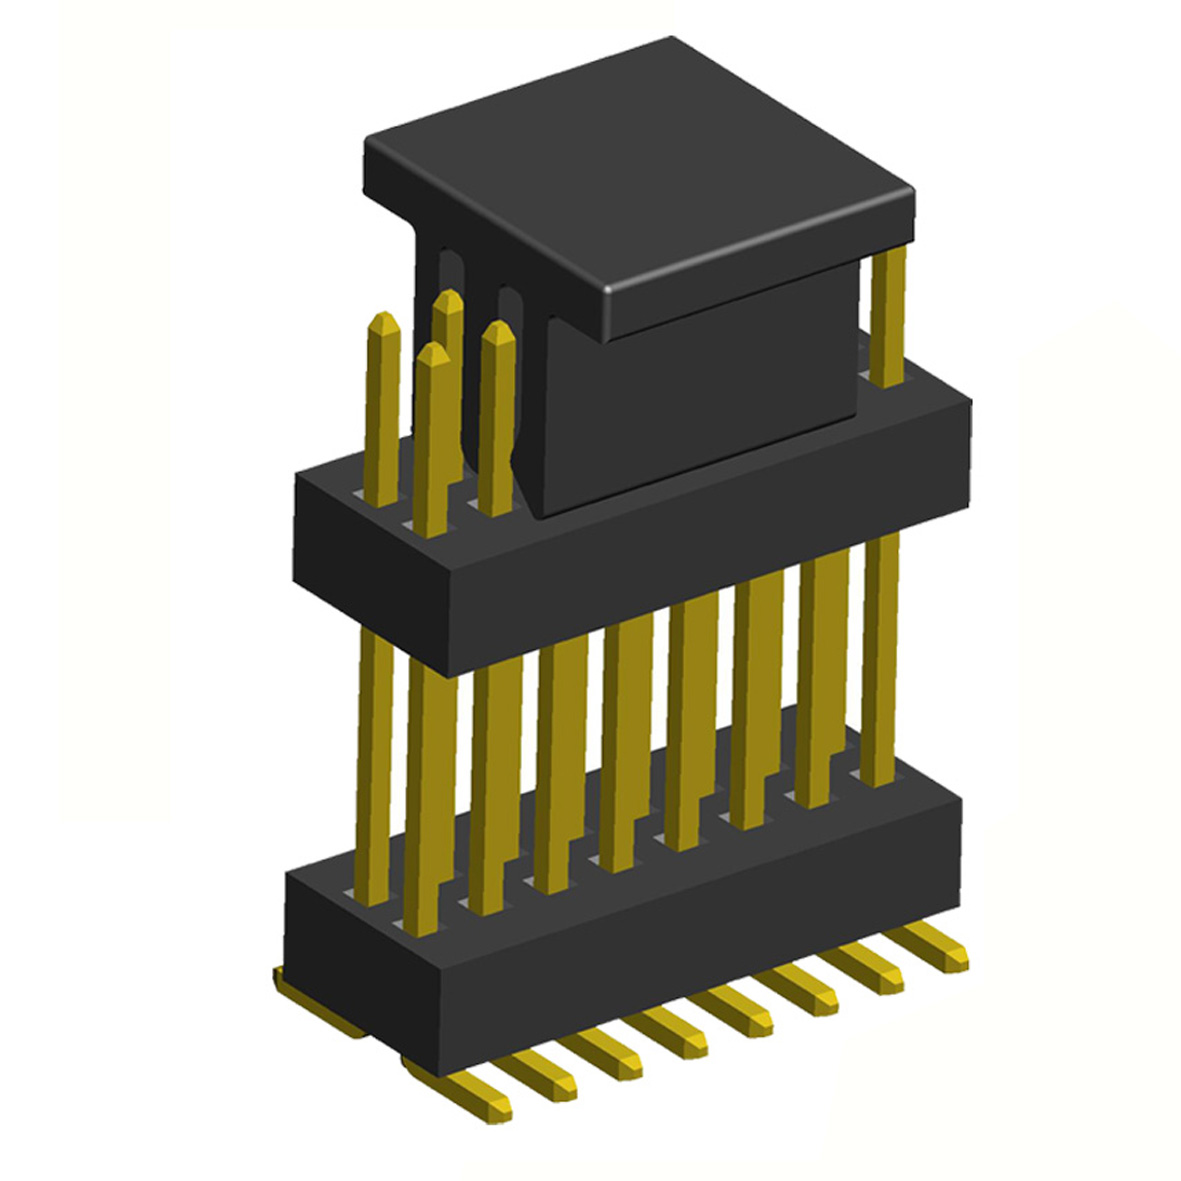 2191SMDI-XXXG-CP series, open double row elevated straight pin headers with guides on PCB for surface mounting (SMD), pitch 1.00 mm, 2x50 pins